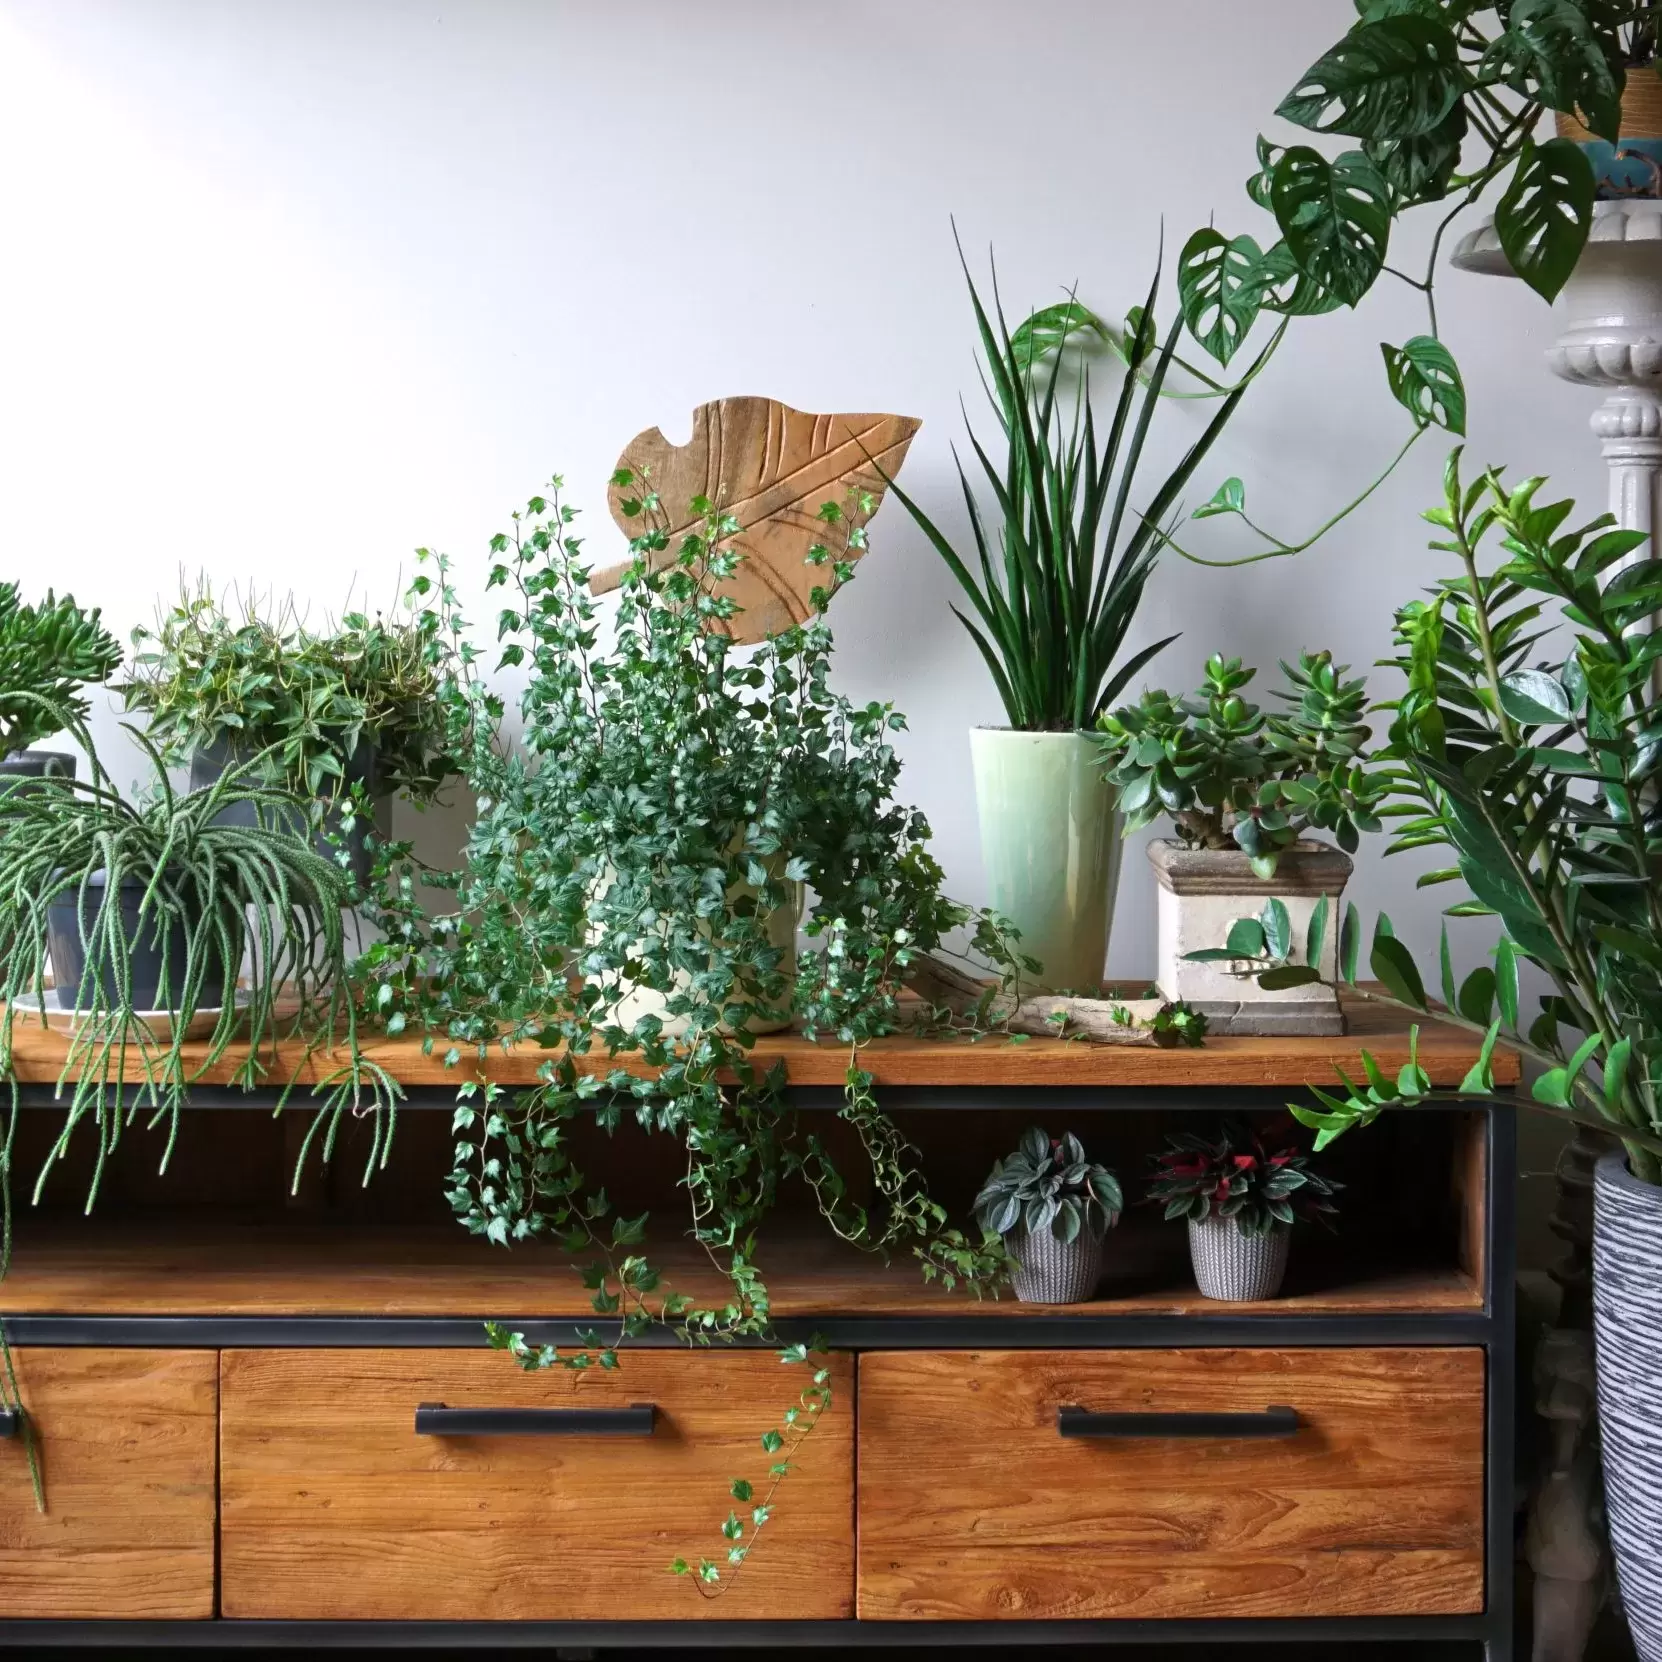 Many plants in a small space